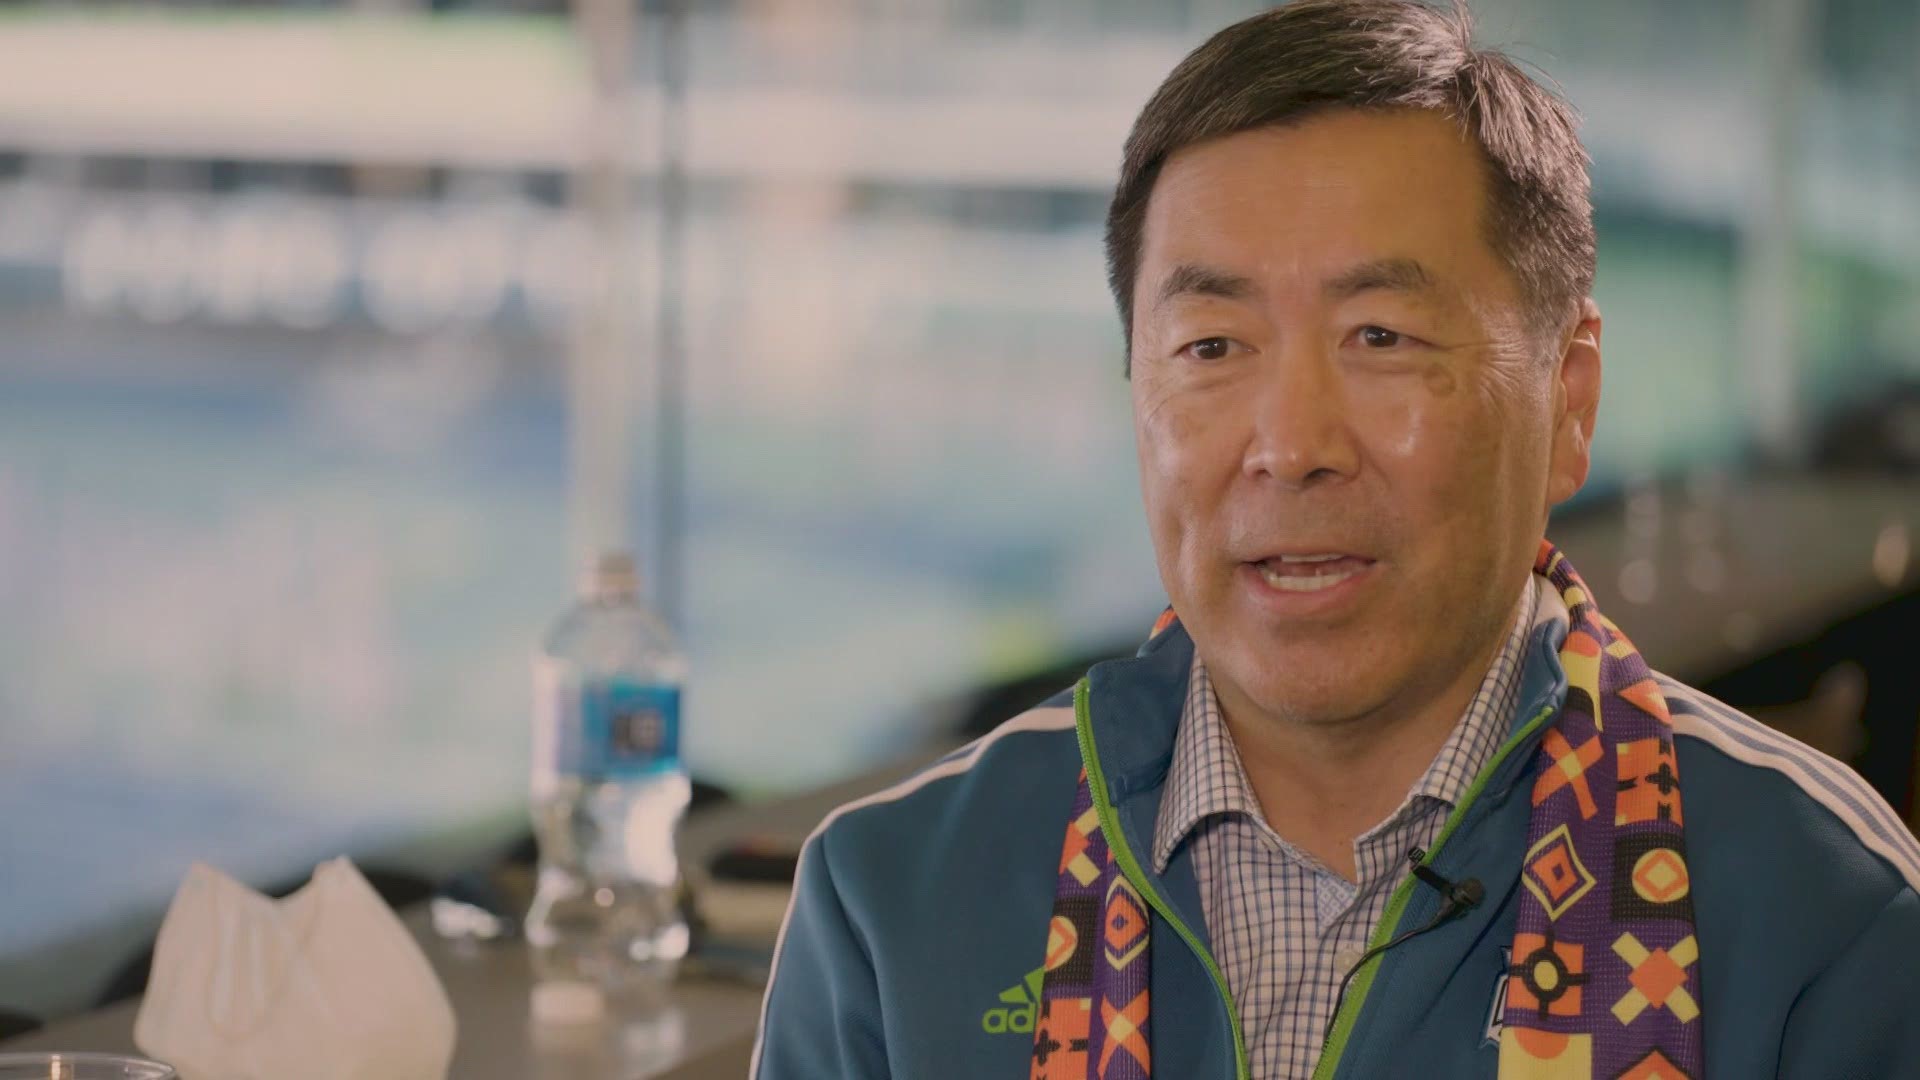 Sounders FC Owner and President of Business Operations Peter Tomozawa is part of the new era in the franchise’s leadership.